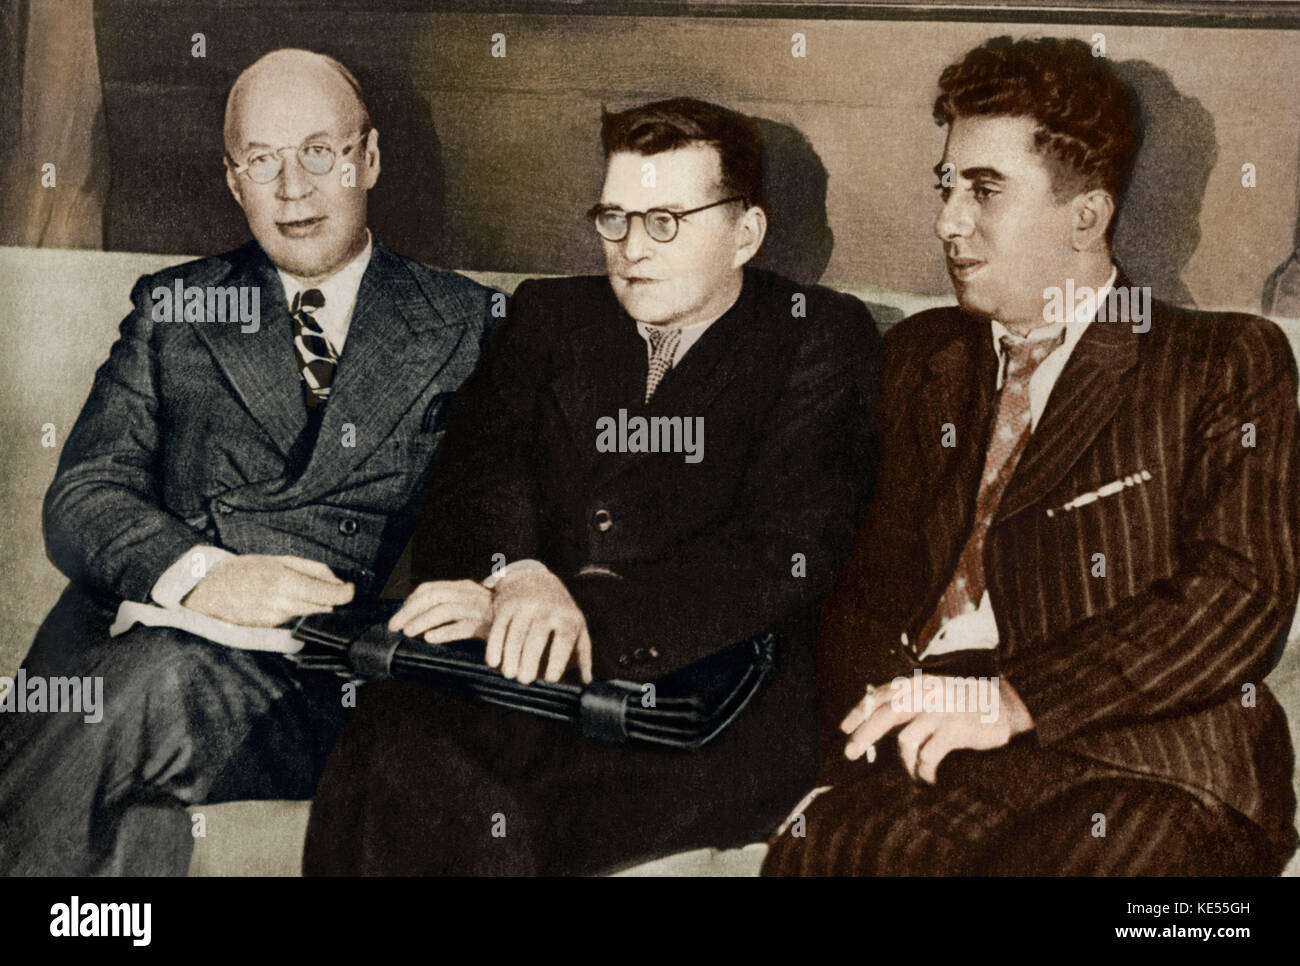 Sergei Prokofiev with Dmitri Shostakovich (middle) and  Aram Ilich Khachaturian (right). Russian composer, 27 April 1891 - 5 March 1953.  Schostakowitsch. Colourised version. Stock Photo